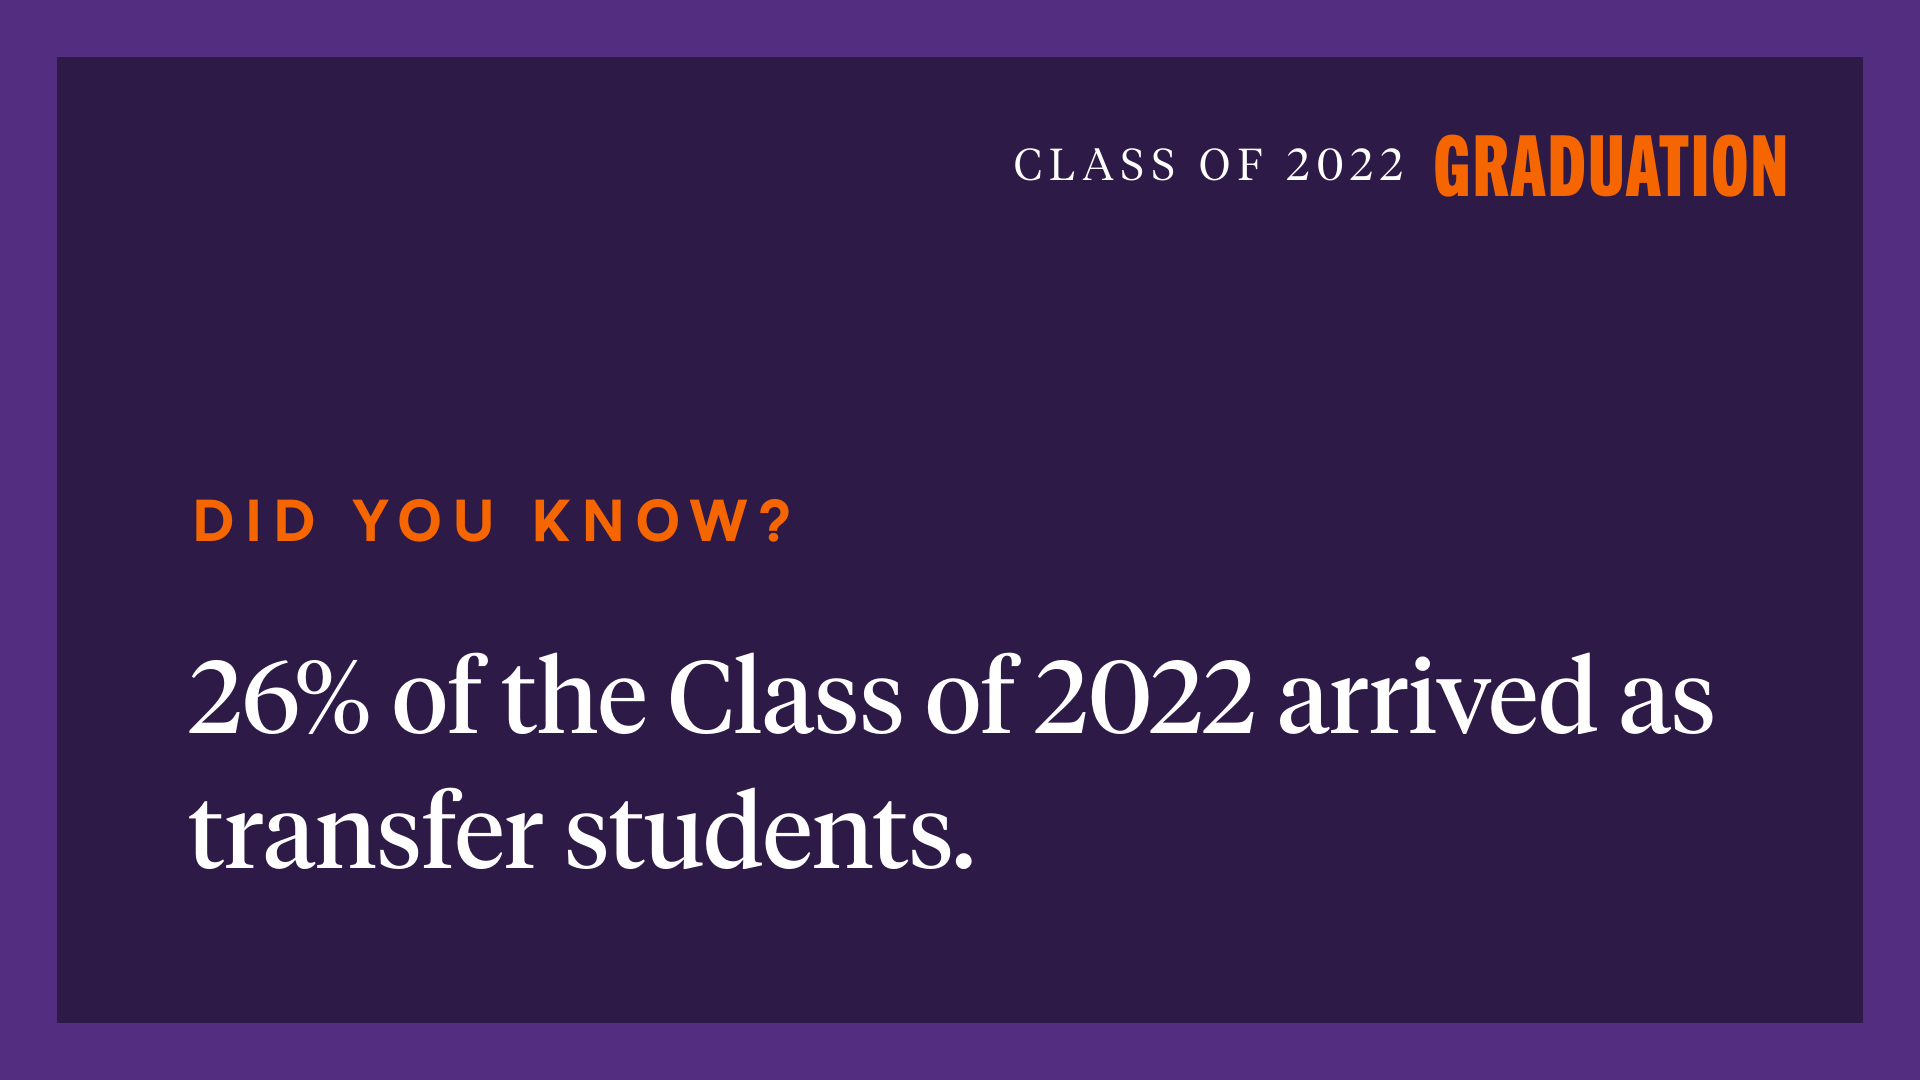 Class of 2022 Graduation: Did you know? 26 percent of the Class of 2022 arrived as transfer students.